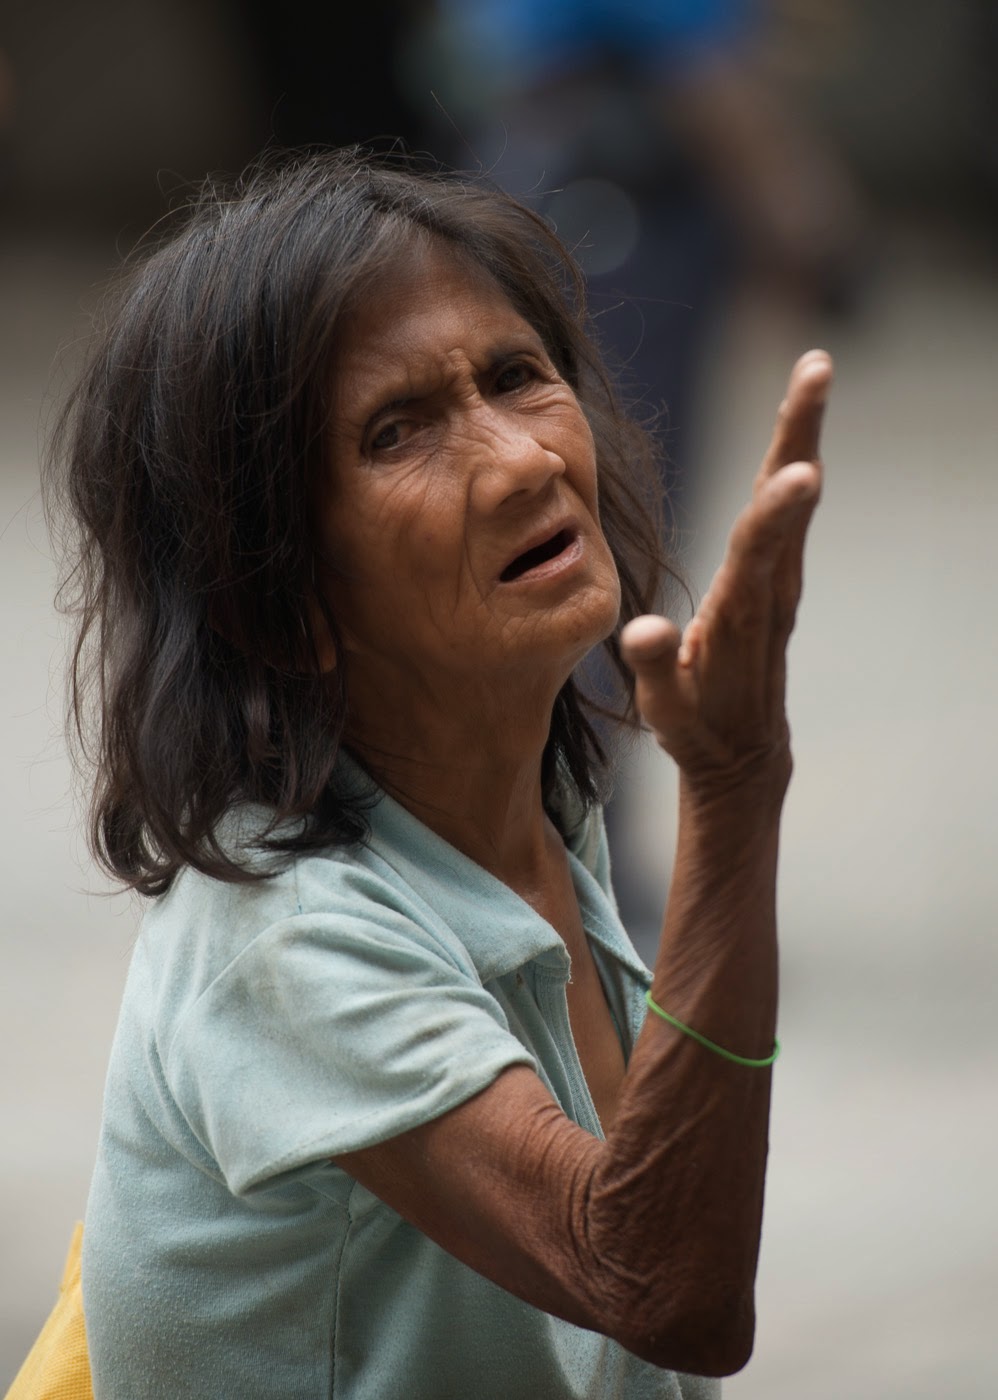  A woman begs for charity outside of a Catholic Church in Manilla, Phillipines.   